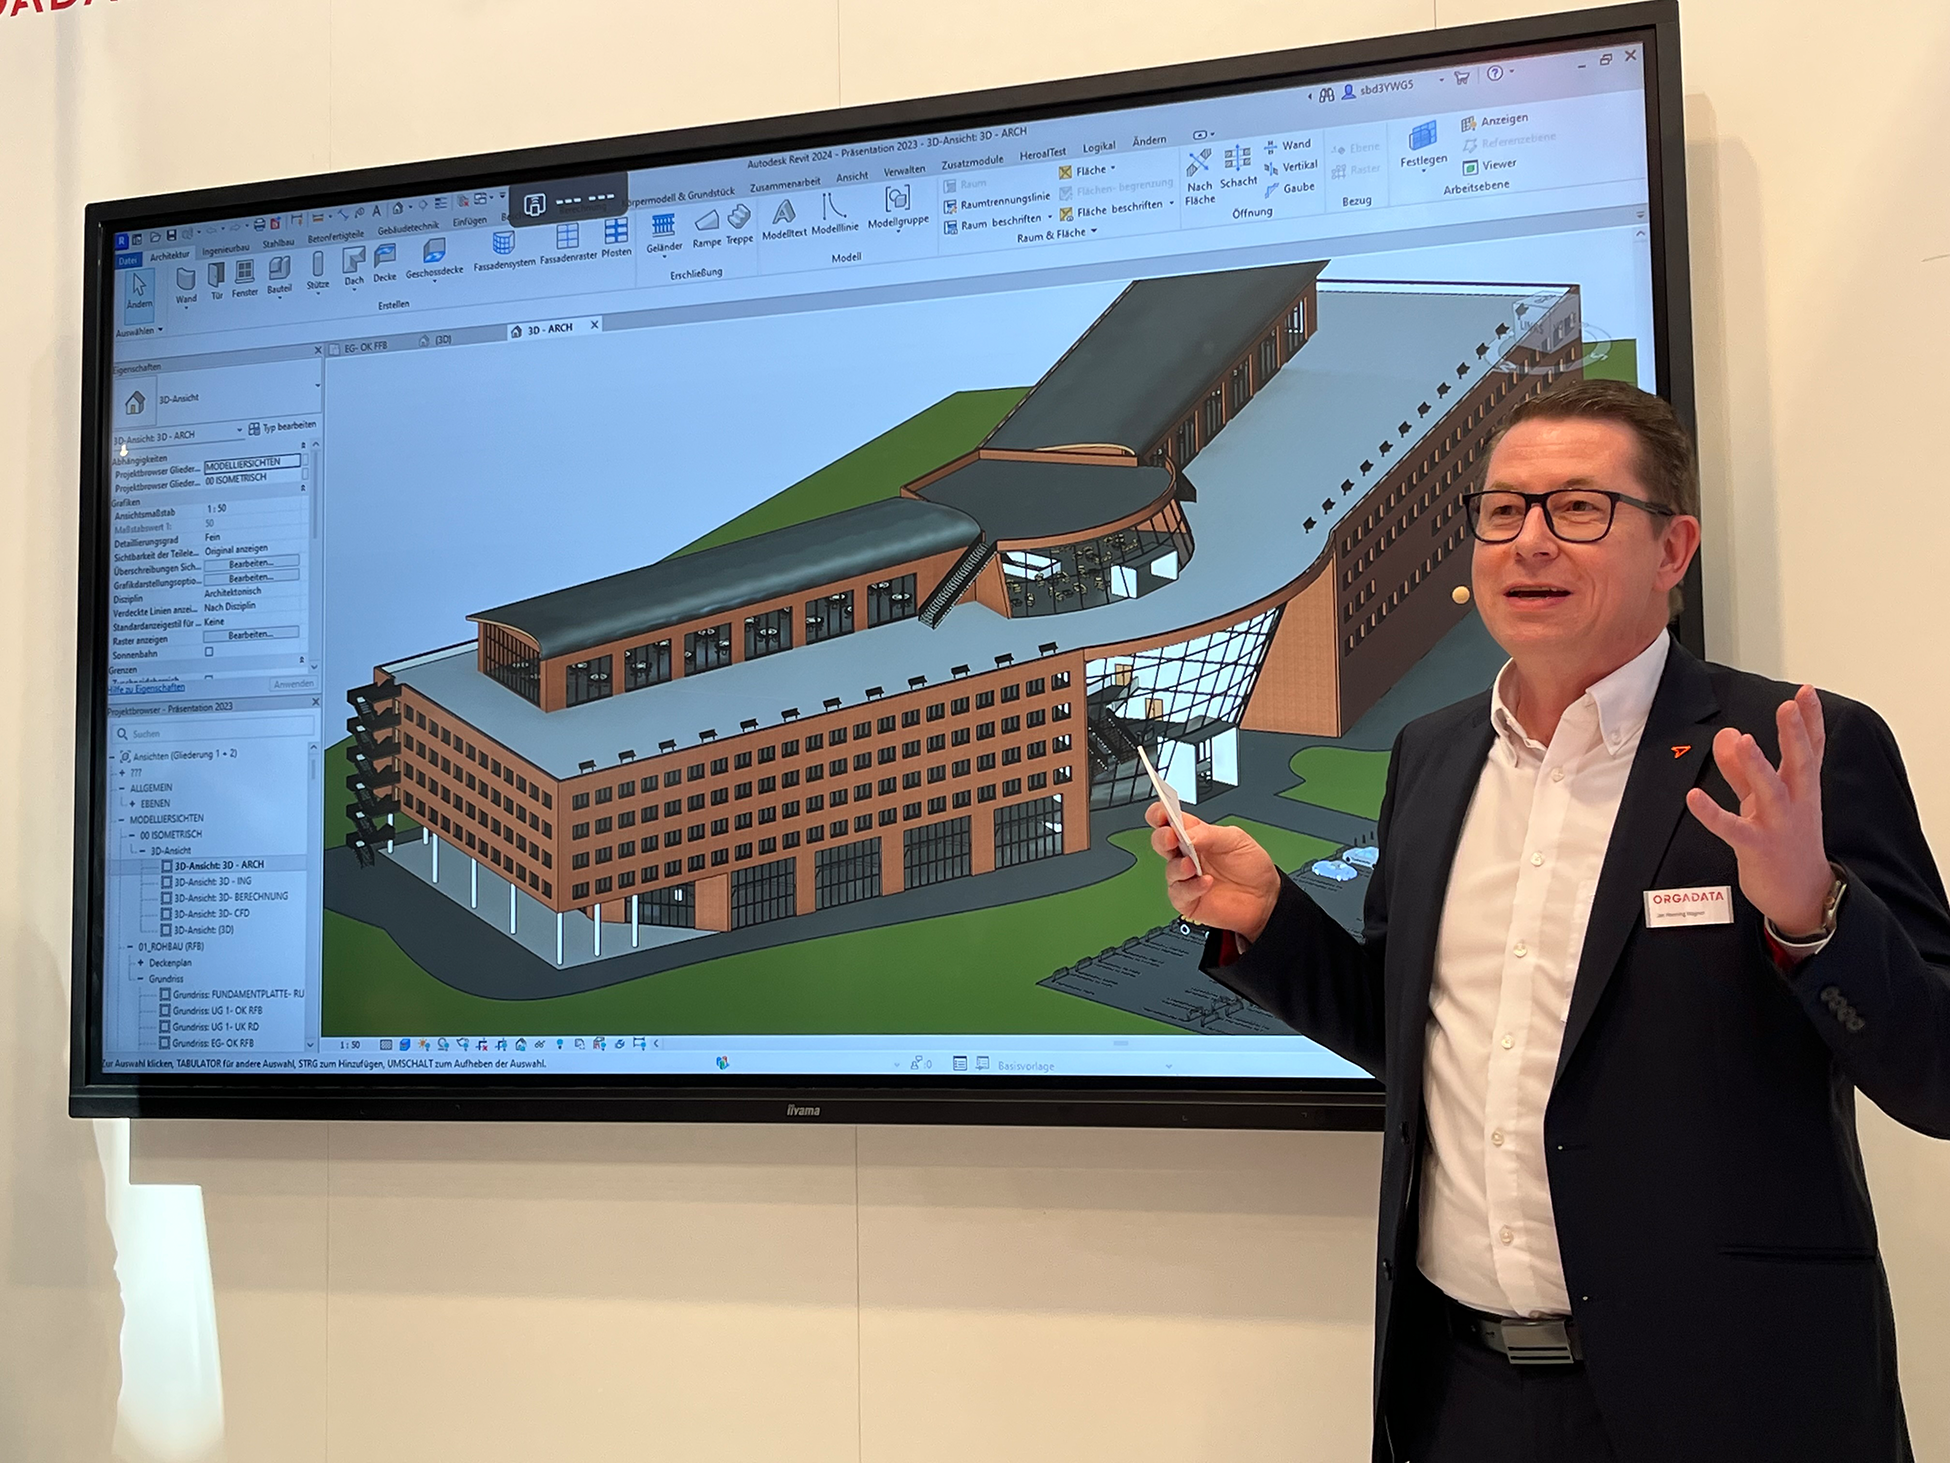 The stage presentation and videos demonstrated the versatility of our software solutions